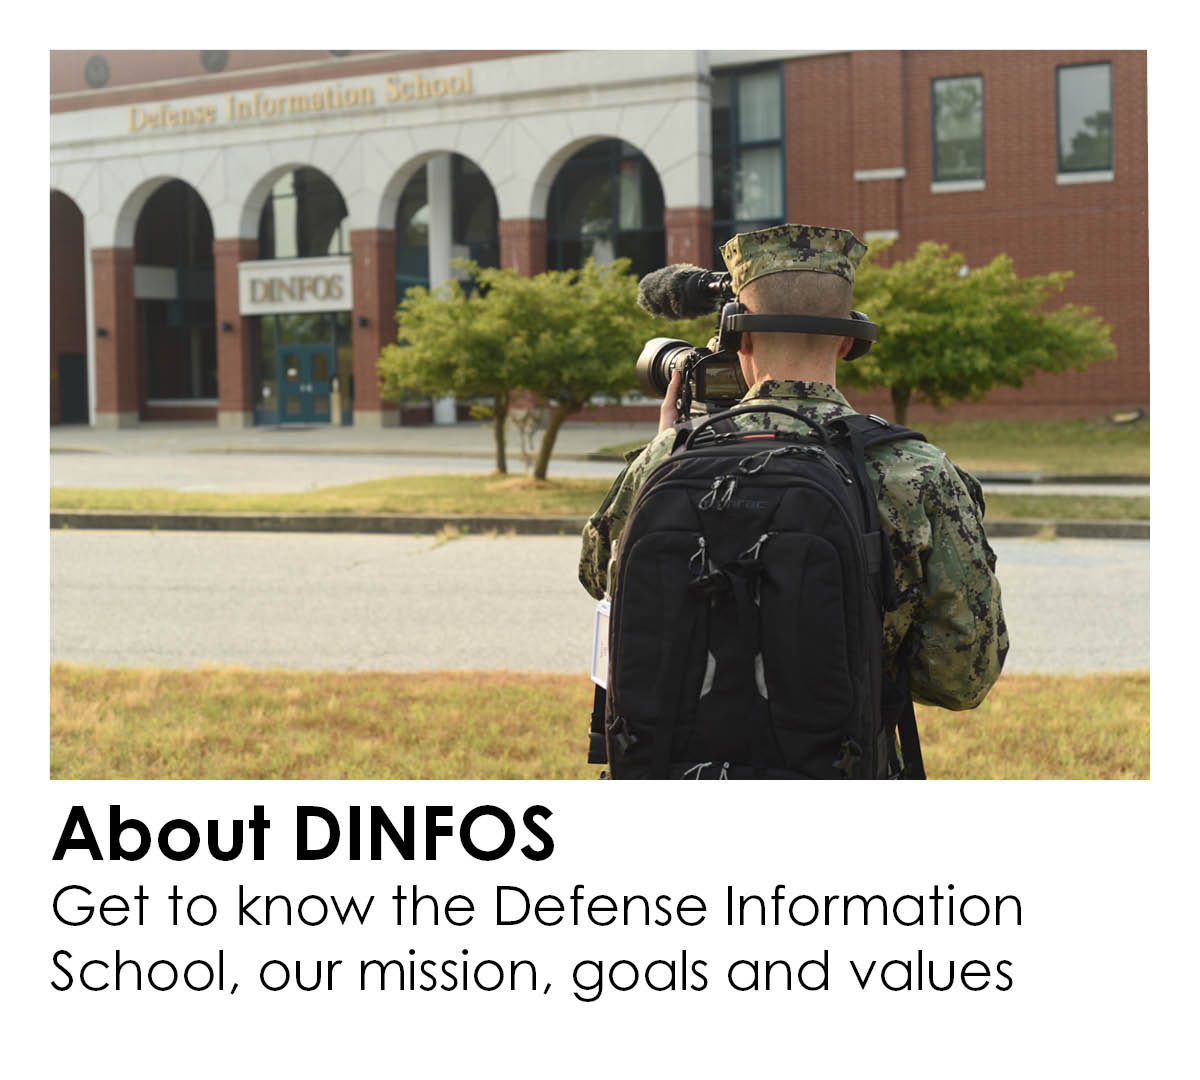 About DINFOS - Get to know the Defense Information School, our mission, goals and values 